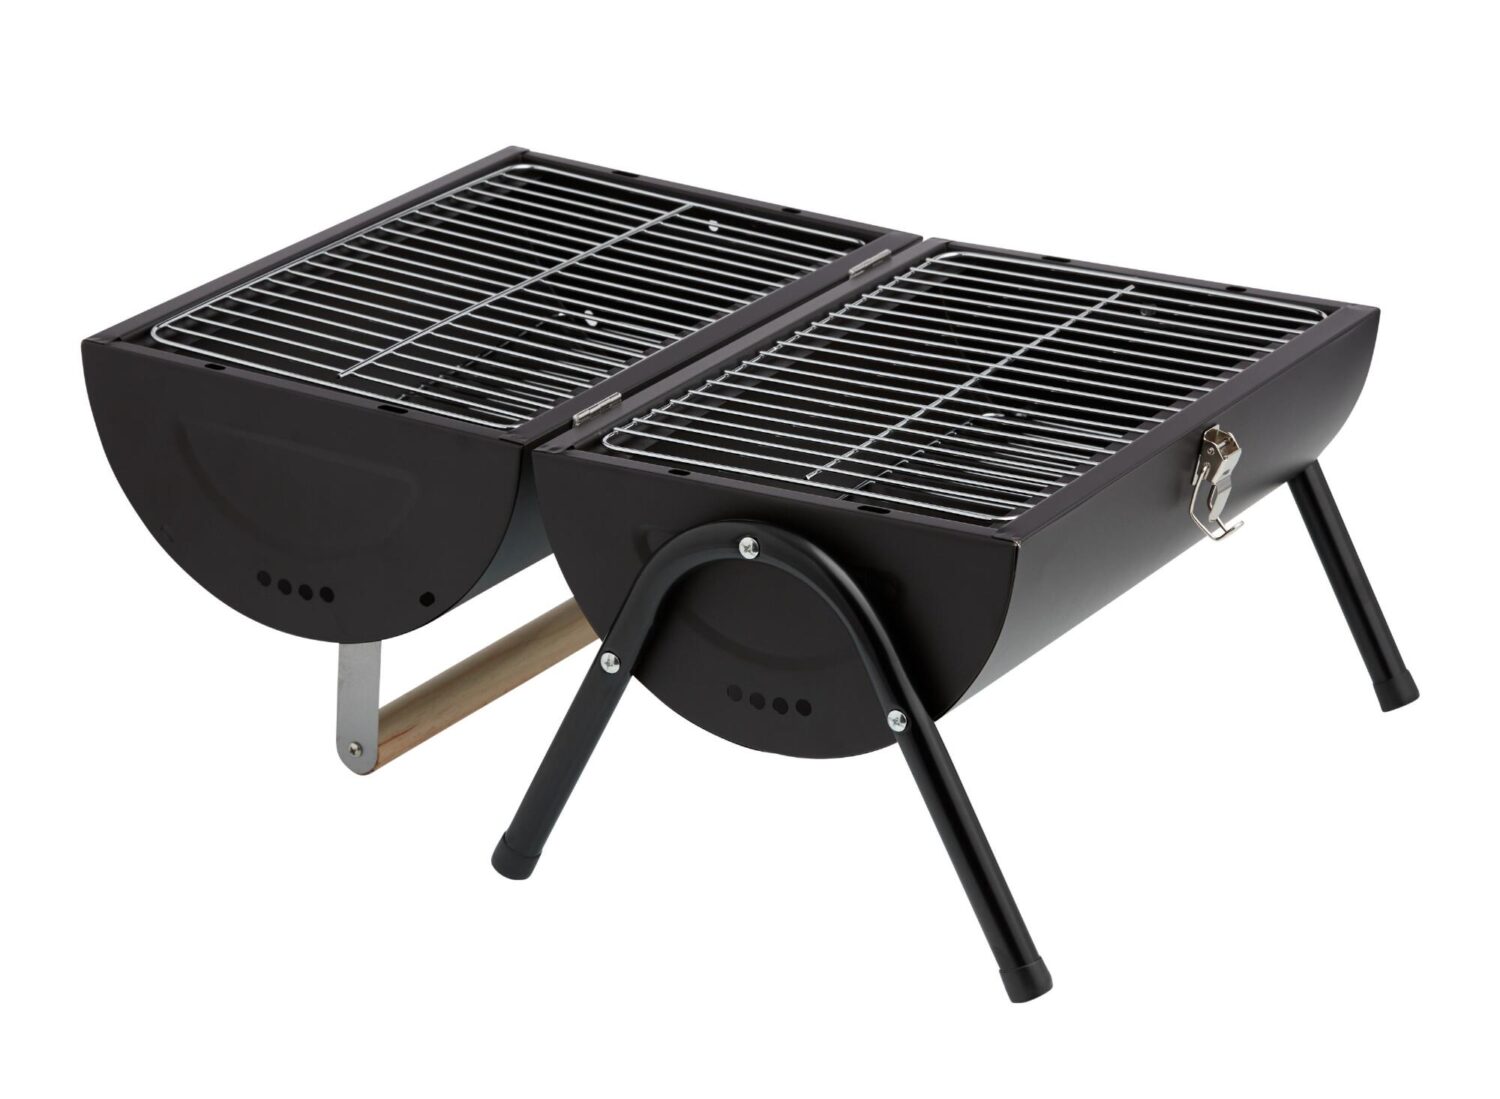 My Favorite Summer Gadgets and Gear: Portable Charcoal Grill